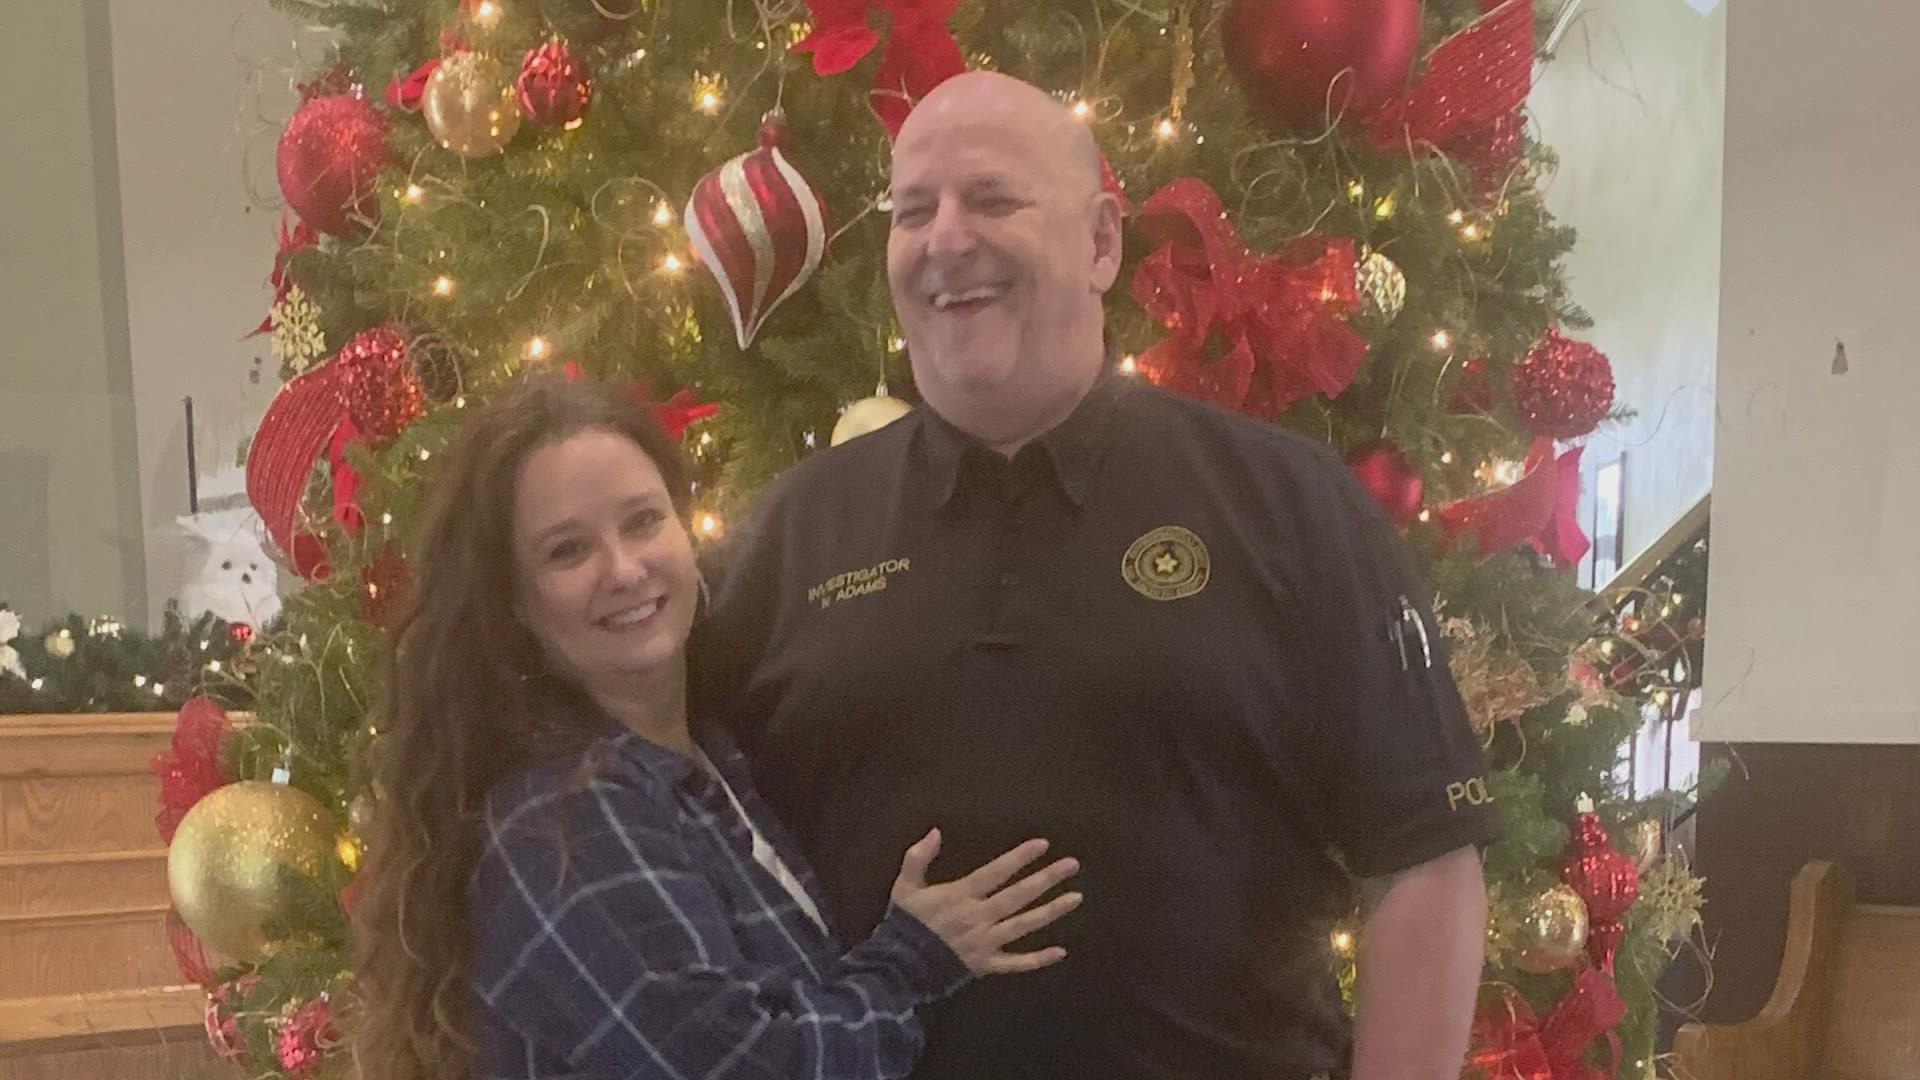 Dee Dee Adams lost her husband, San Jacinto deputy constable Neil Adams, in a shooting while he was working an extra job.